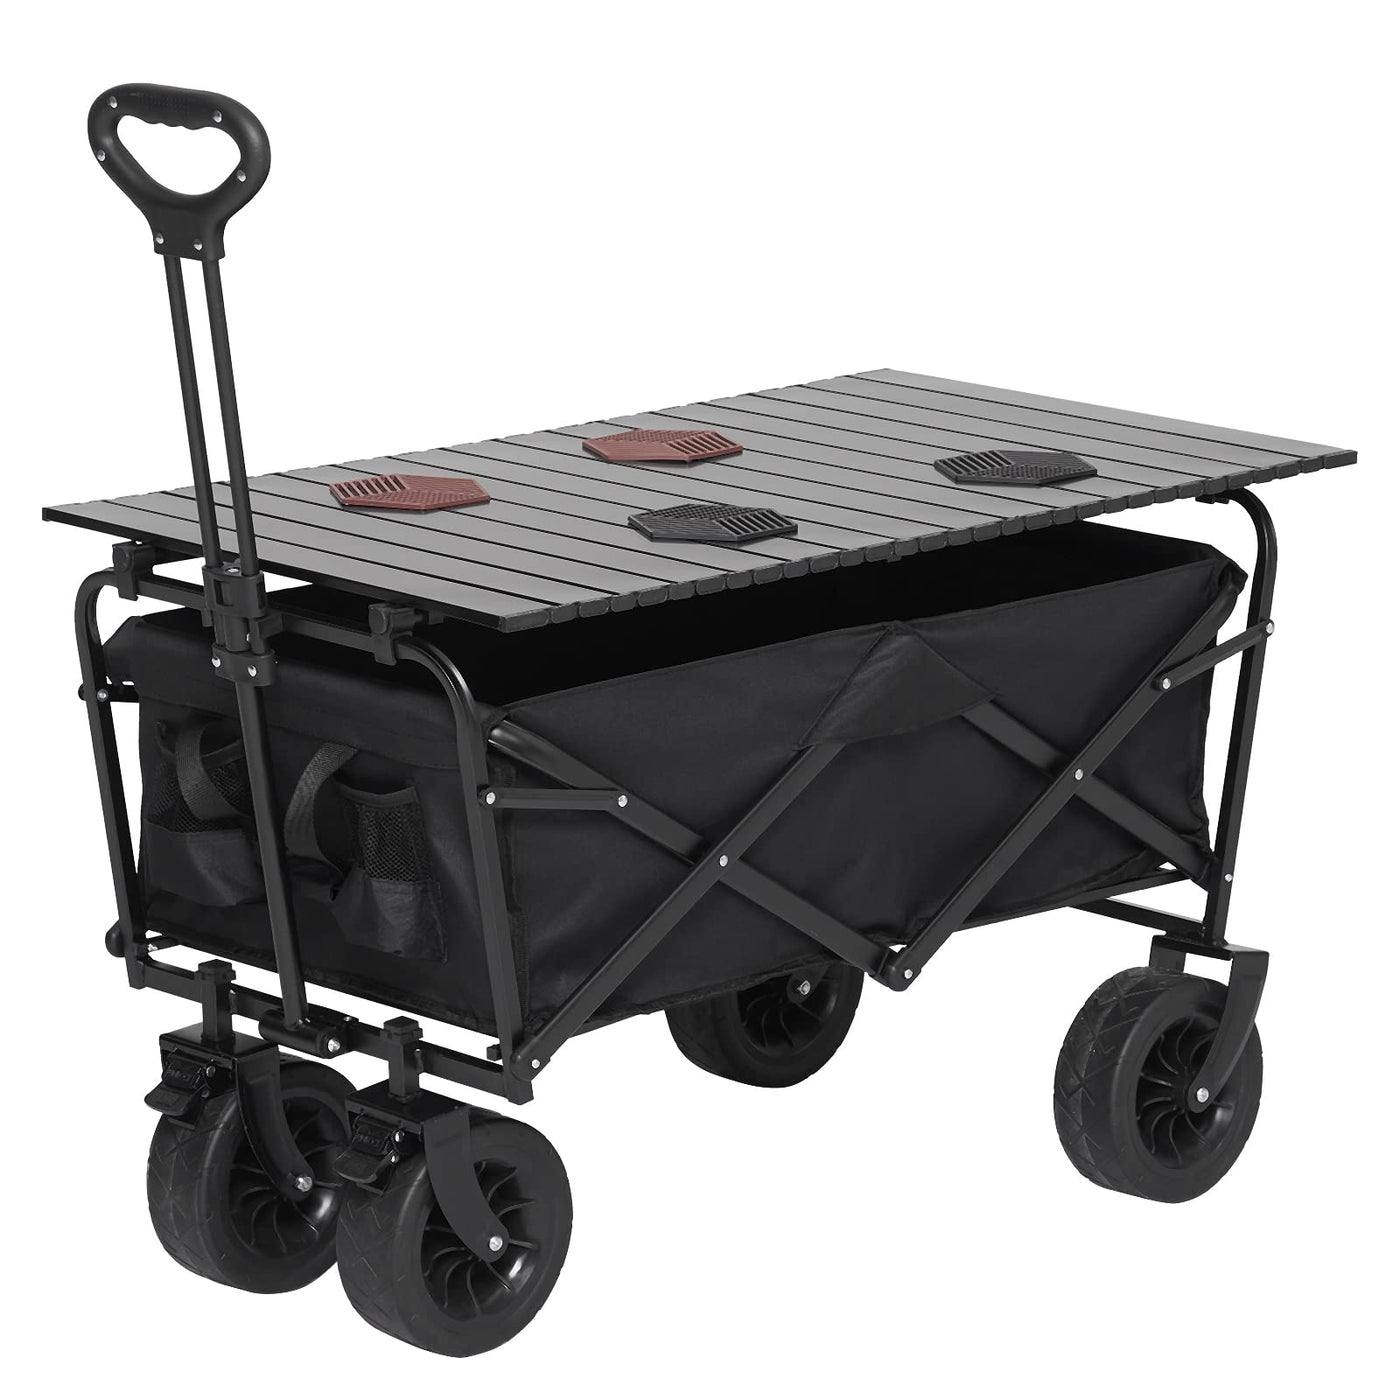 GARVEE 8 inch All Terrain Wheels Collapsible Outdoor Camping Wagon  Iron Folding Table top 4 Plate mats without brakes